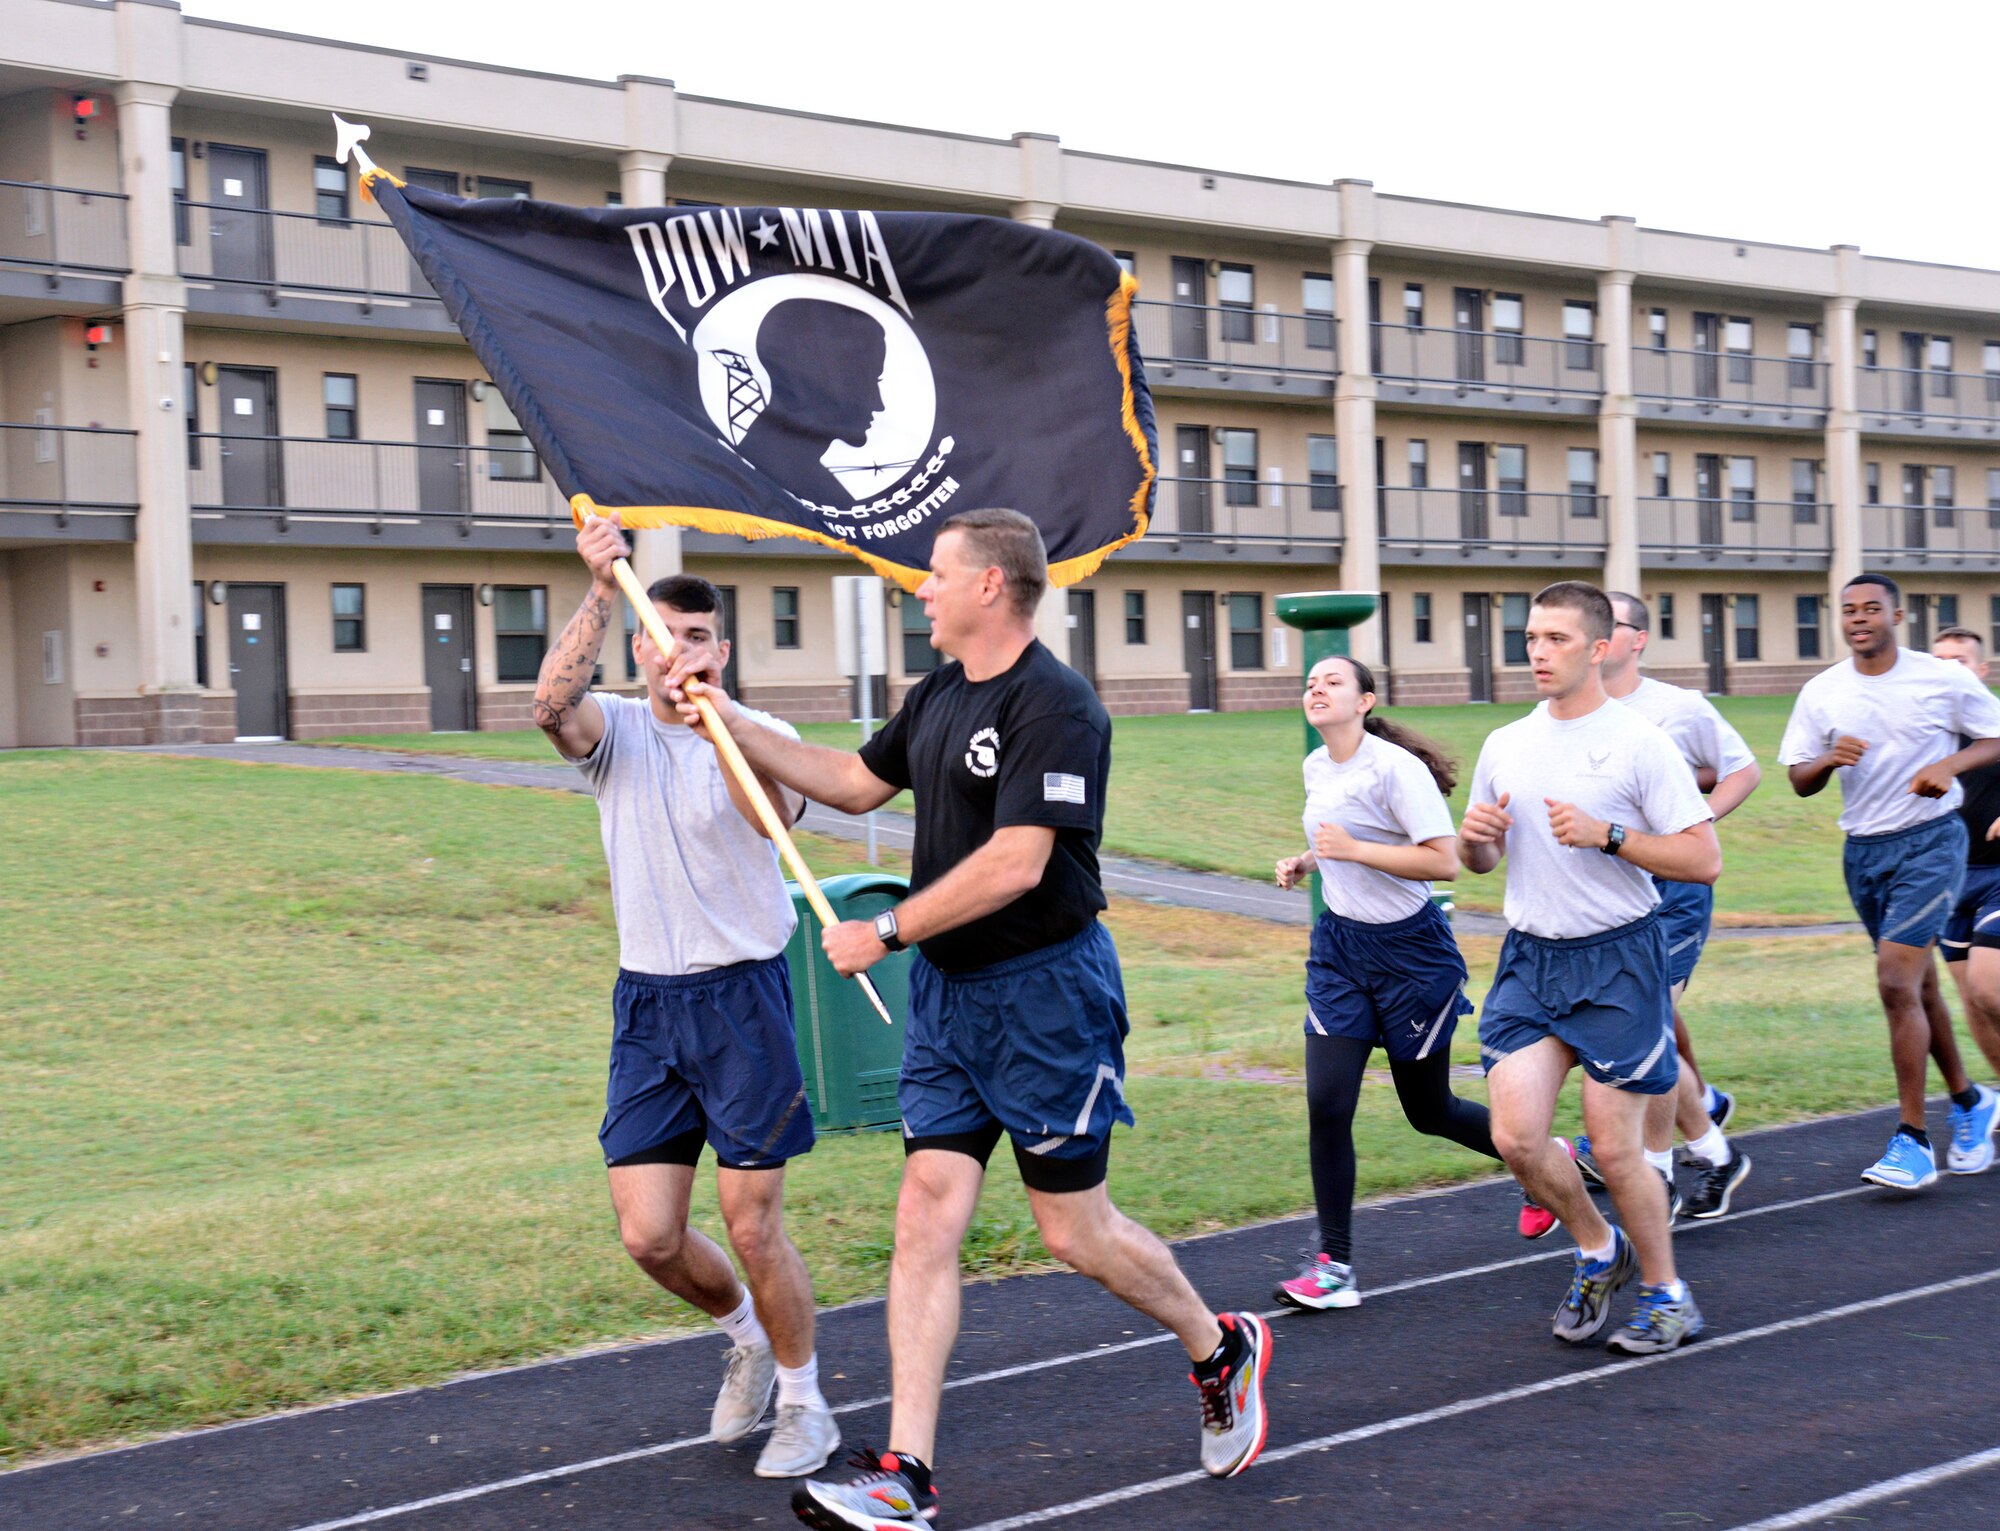 Chief Master Sgt. Roger Turnipseed, with the 552nd Aircraft Maintenance Squadron and also with the Tinker Chief’s Group, passes the POW/MIA flag to a member of the 72nd Force Support Squadron during the 24-hour Vigil Run as part of Tinker’s POW/MIA events. Members of Team Tinker took turns carrying the POW/MIA flag around the Tinker track from 7:30 a.m. Sept. 15 to 7:30 a.m. Sept. 16 when it was moved from the track to the POW/MIA Breakfast at the Tinker Club. The flag was then passed to the youngest Airman at the breakfast and posted at the front of the room during the ceremony. After the breakfast, the flag was handed off to participants of the POW/MIA Ruck March and carried for the entire 10K. Later that day, the flag was taken to the Del City American Legion and VFW Post 9969 for a POW/MIA Retreat Ceremony. At the retreat, it was announced that the flag had been moved by approximately 120 Airmen, civilians, contractors, and dependents for a total of 160.15 miles. (Air Force photo by Kelly White)